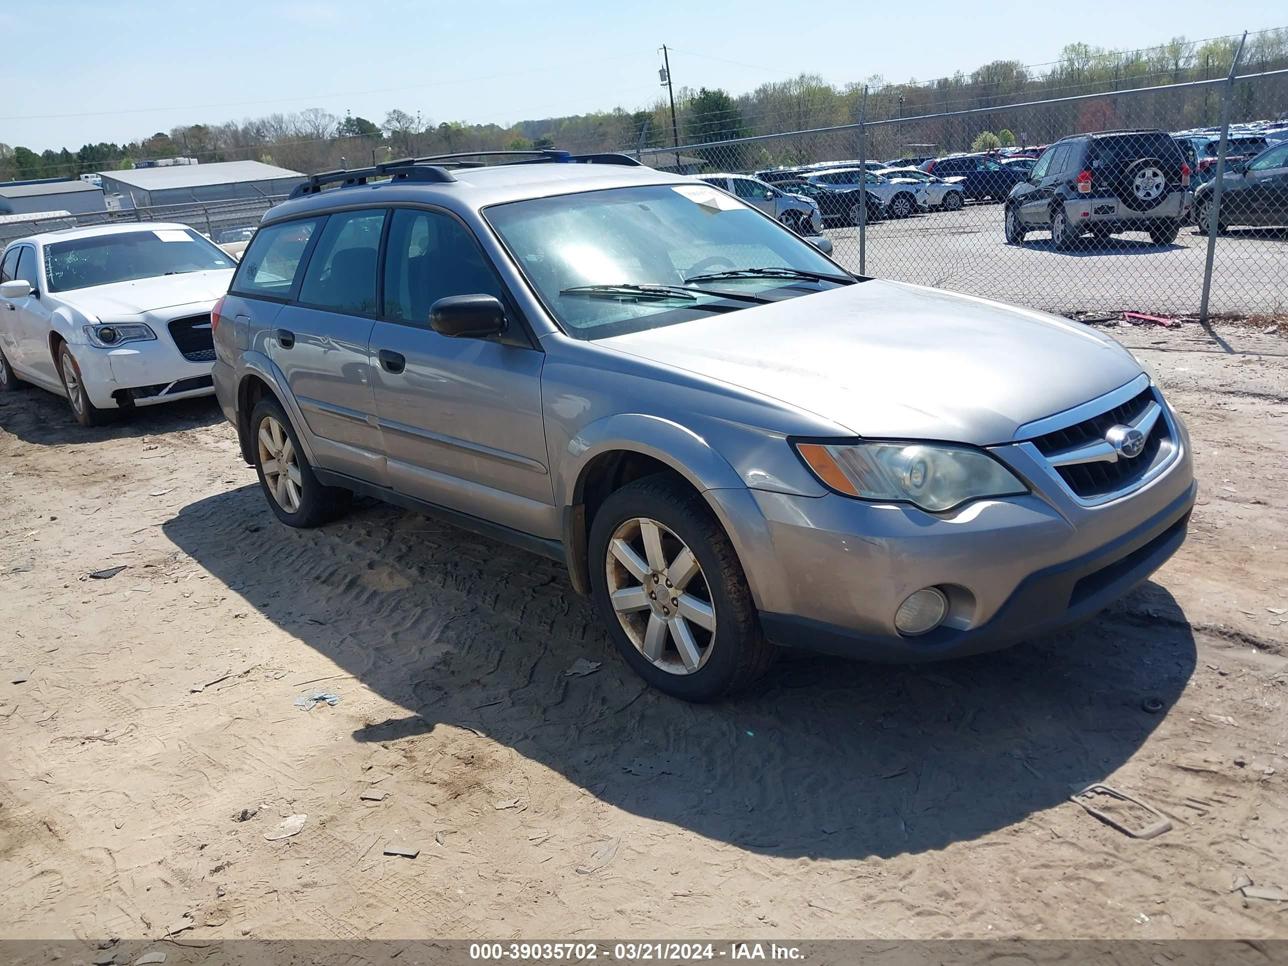 vin: 4S4BP61C987352993 4S4BP61C987352993 2008 subaru outback 2500 for Sale in 29681, 422 Scuffletown Rd, Simpsonville, South Carolina, USA